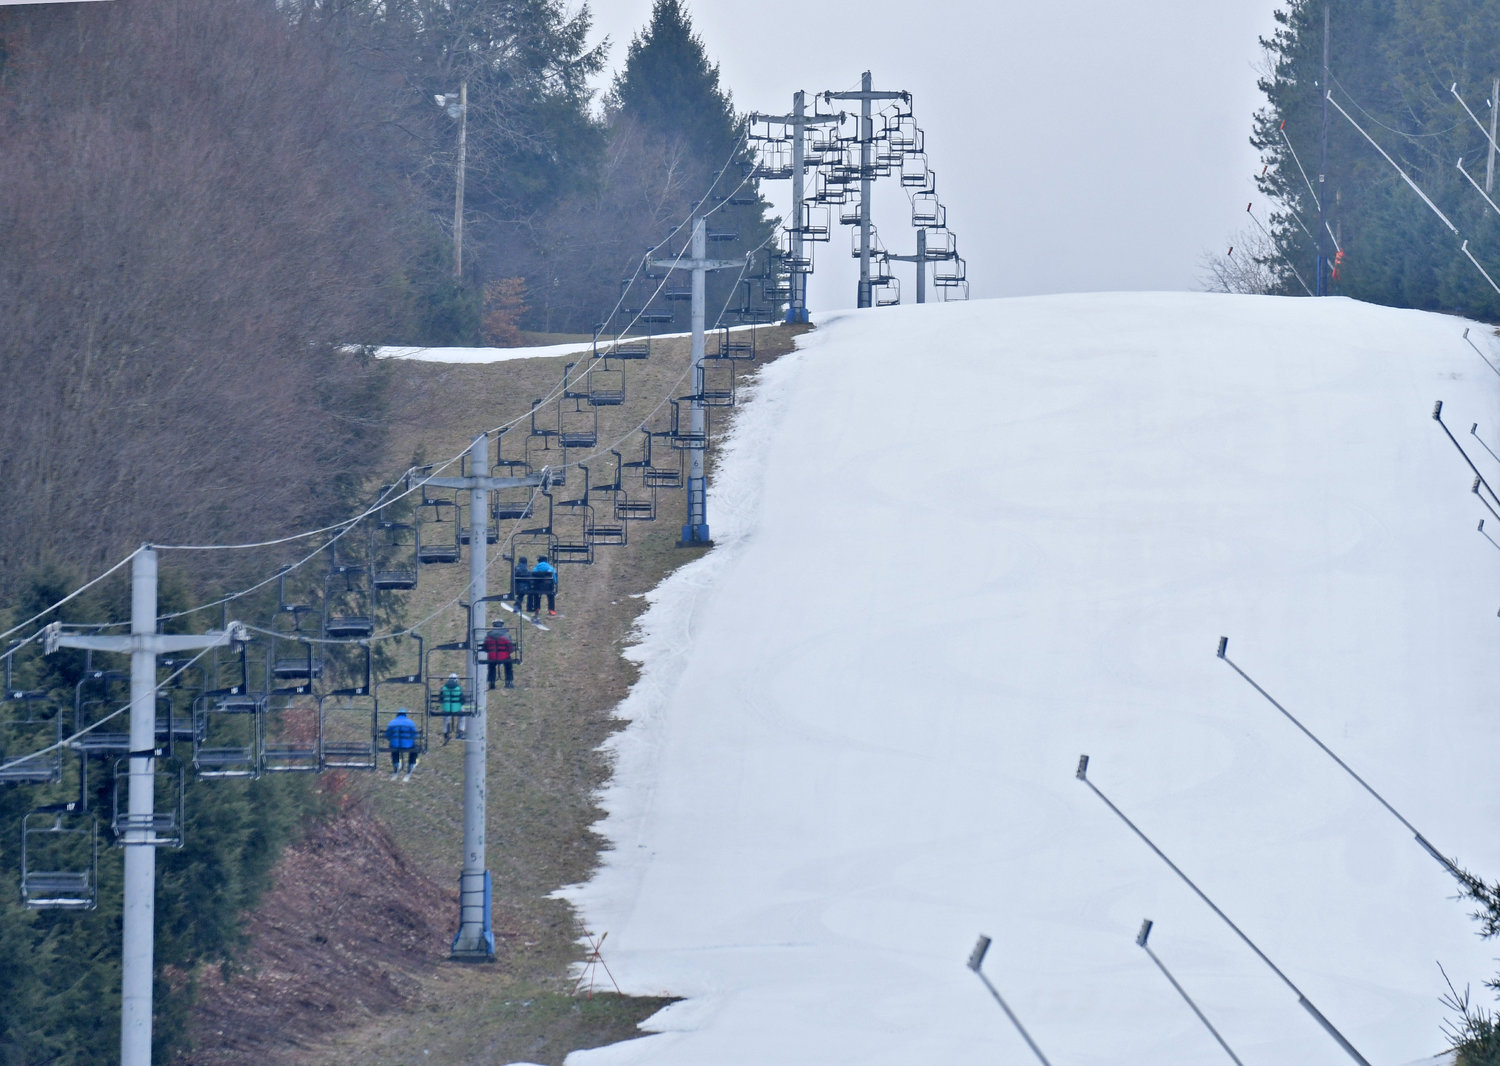 Skiers ride a lift up at Woods Valley next to the "Copy Cat" run on Friday, January 6, 2023. Warmer weather conditions leave the trails surrounded by grass.